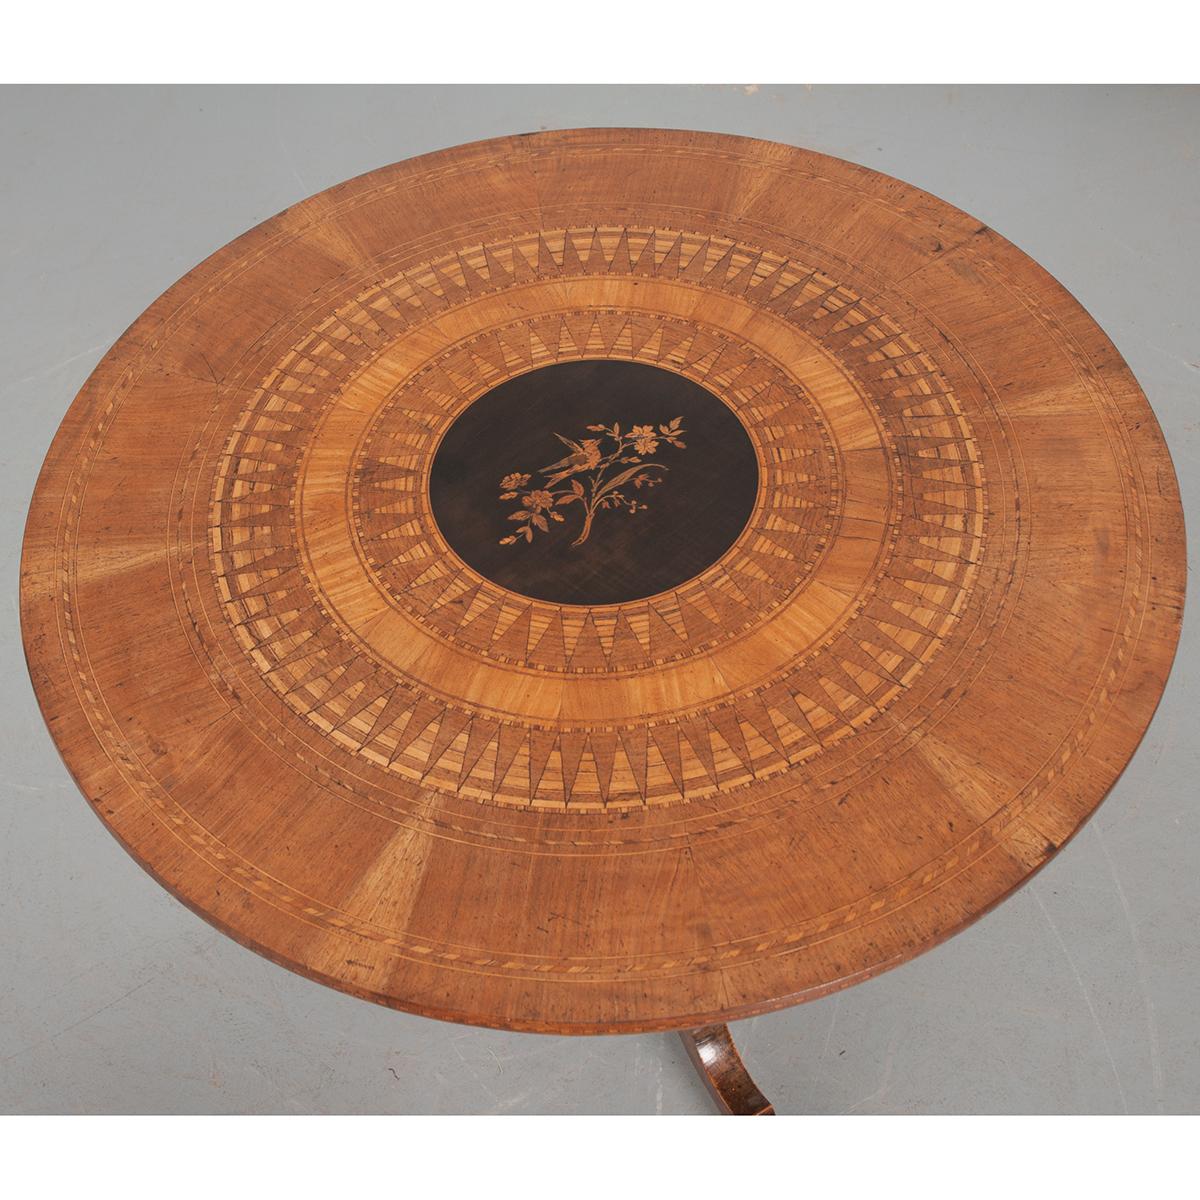 This French 19th century tea table is quite nice. It is Charles X style and circa 1830. It has a center medallion of ebonized wood inlaid with a bird perched on a branch of leaves and flowers. There are many concentric circles going to the edge of